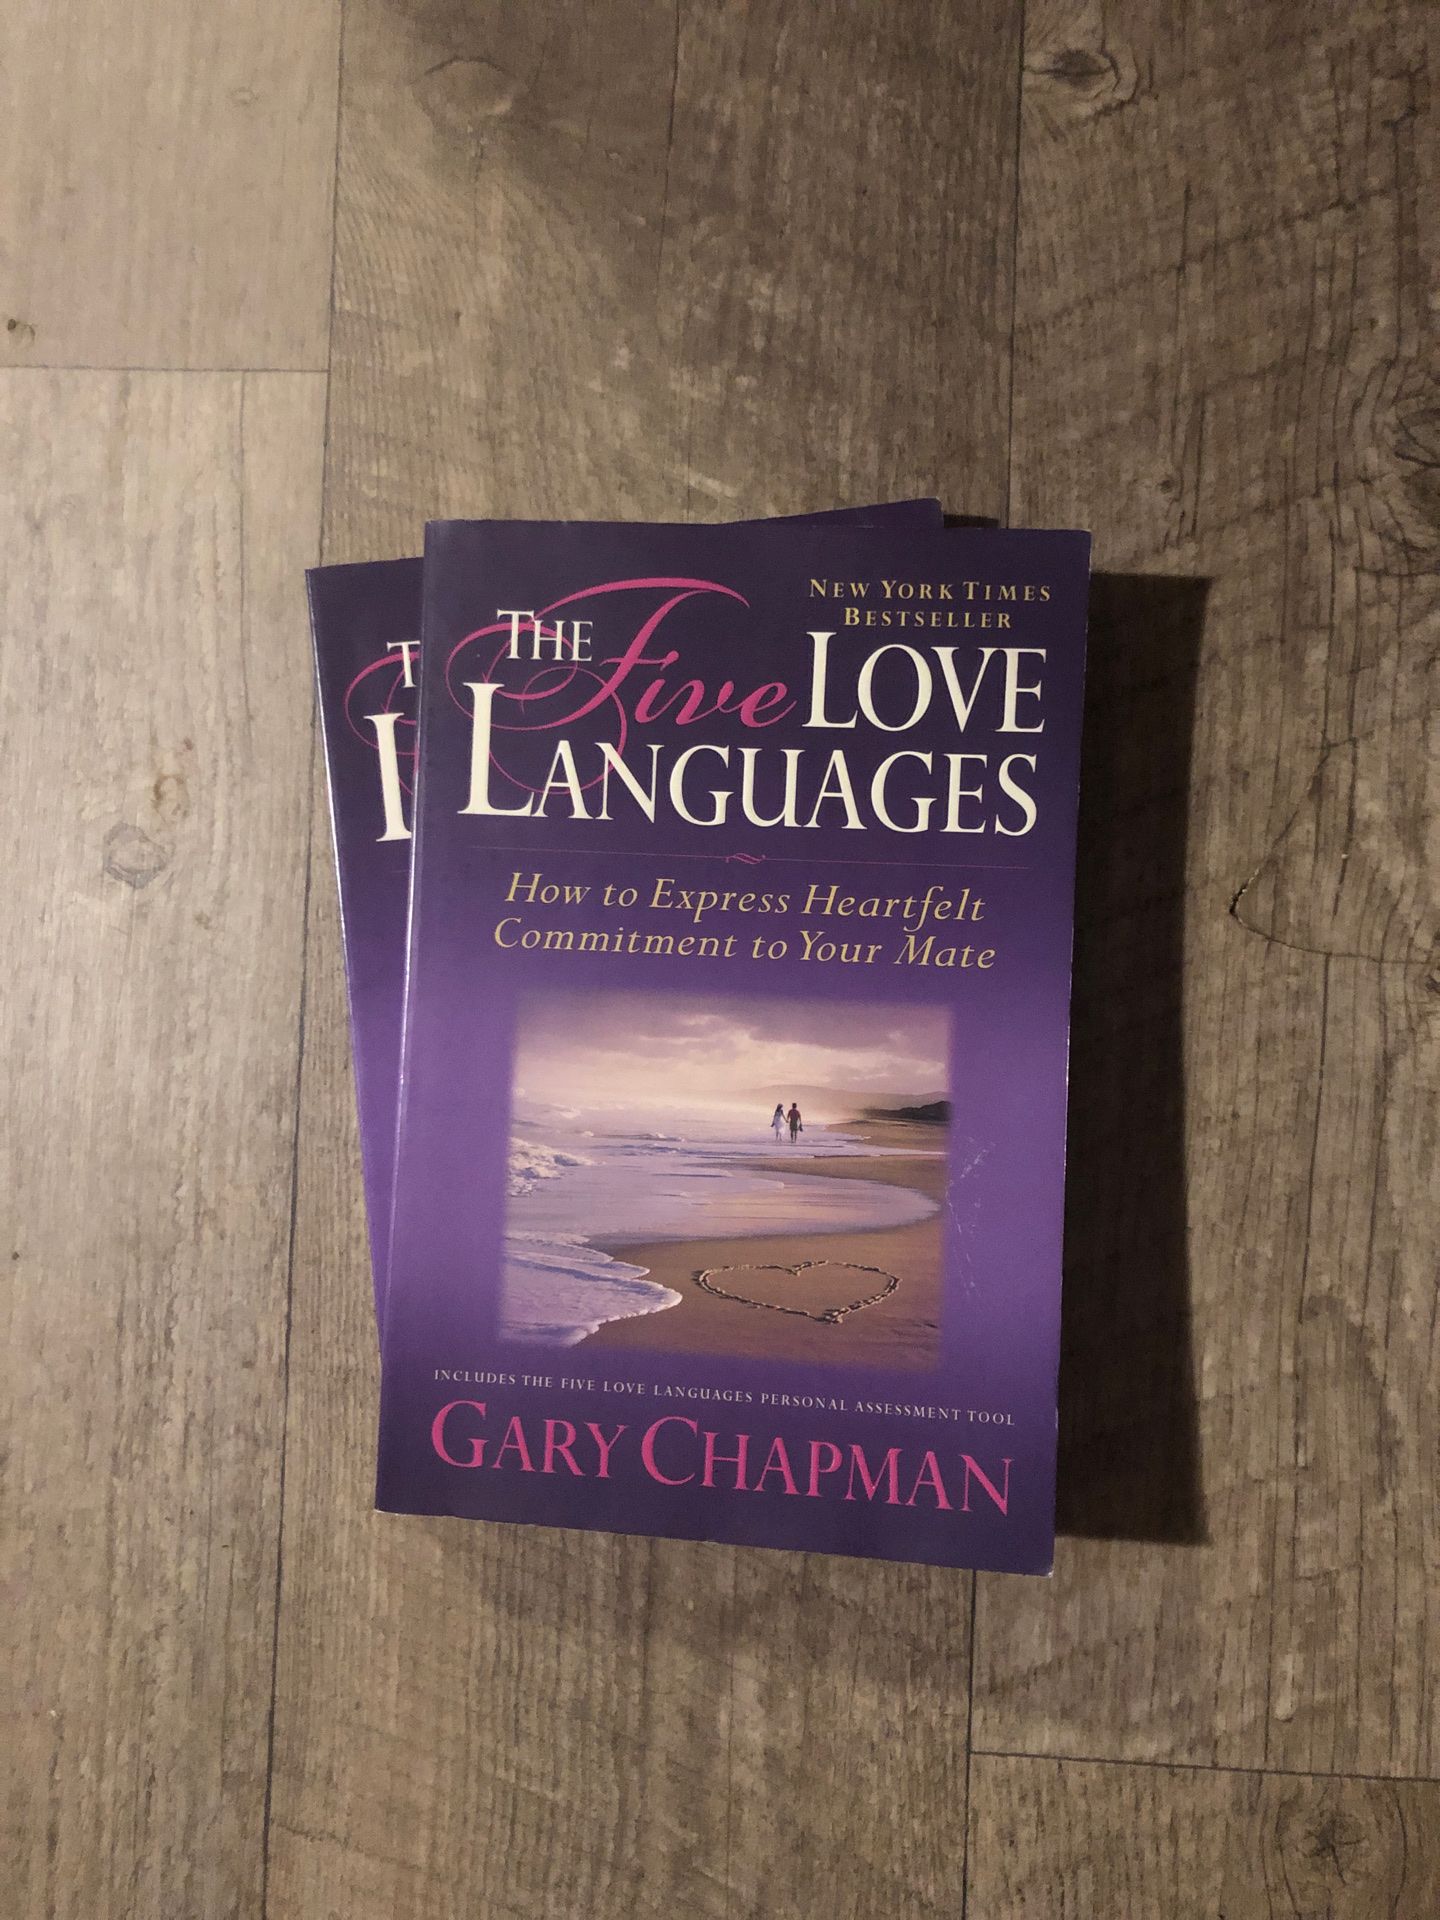 (2) The Five Love Languages by Gary Chapman